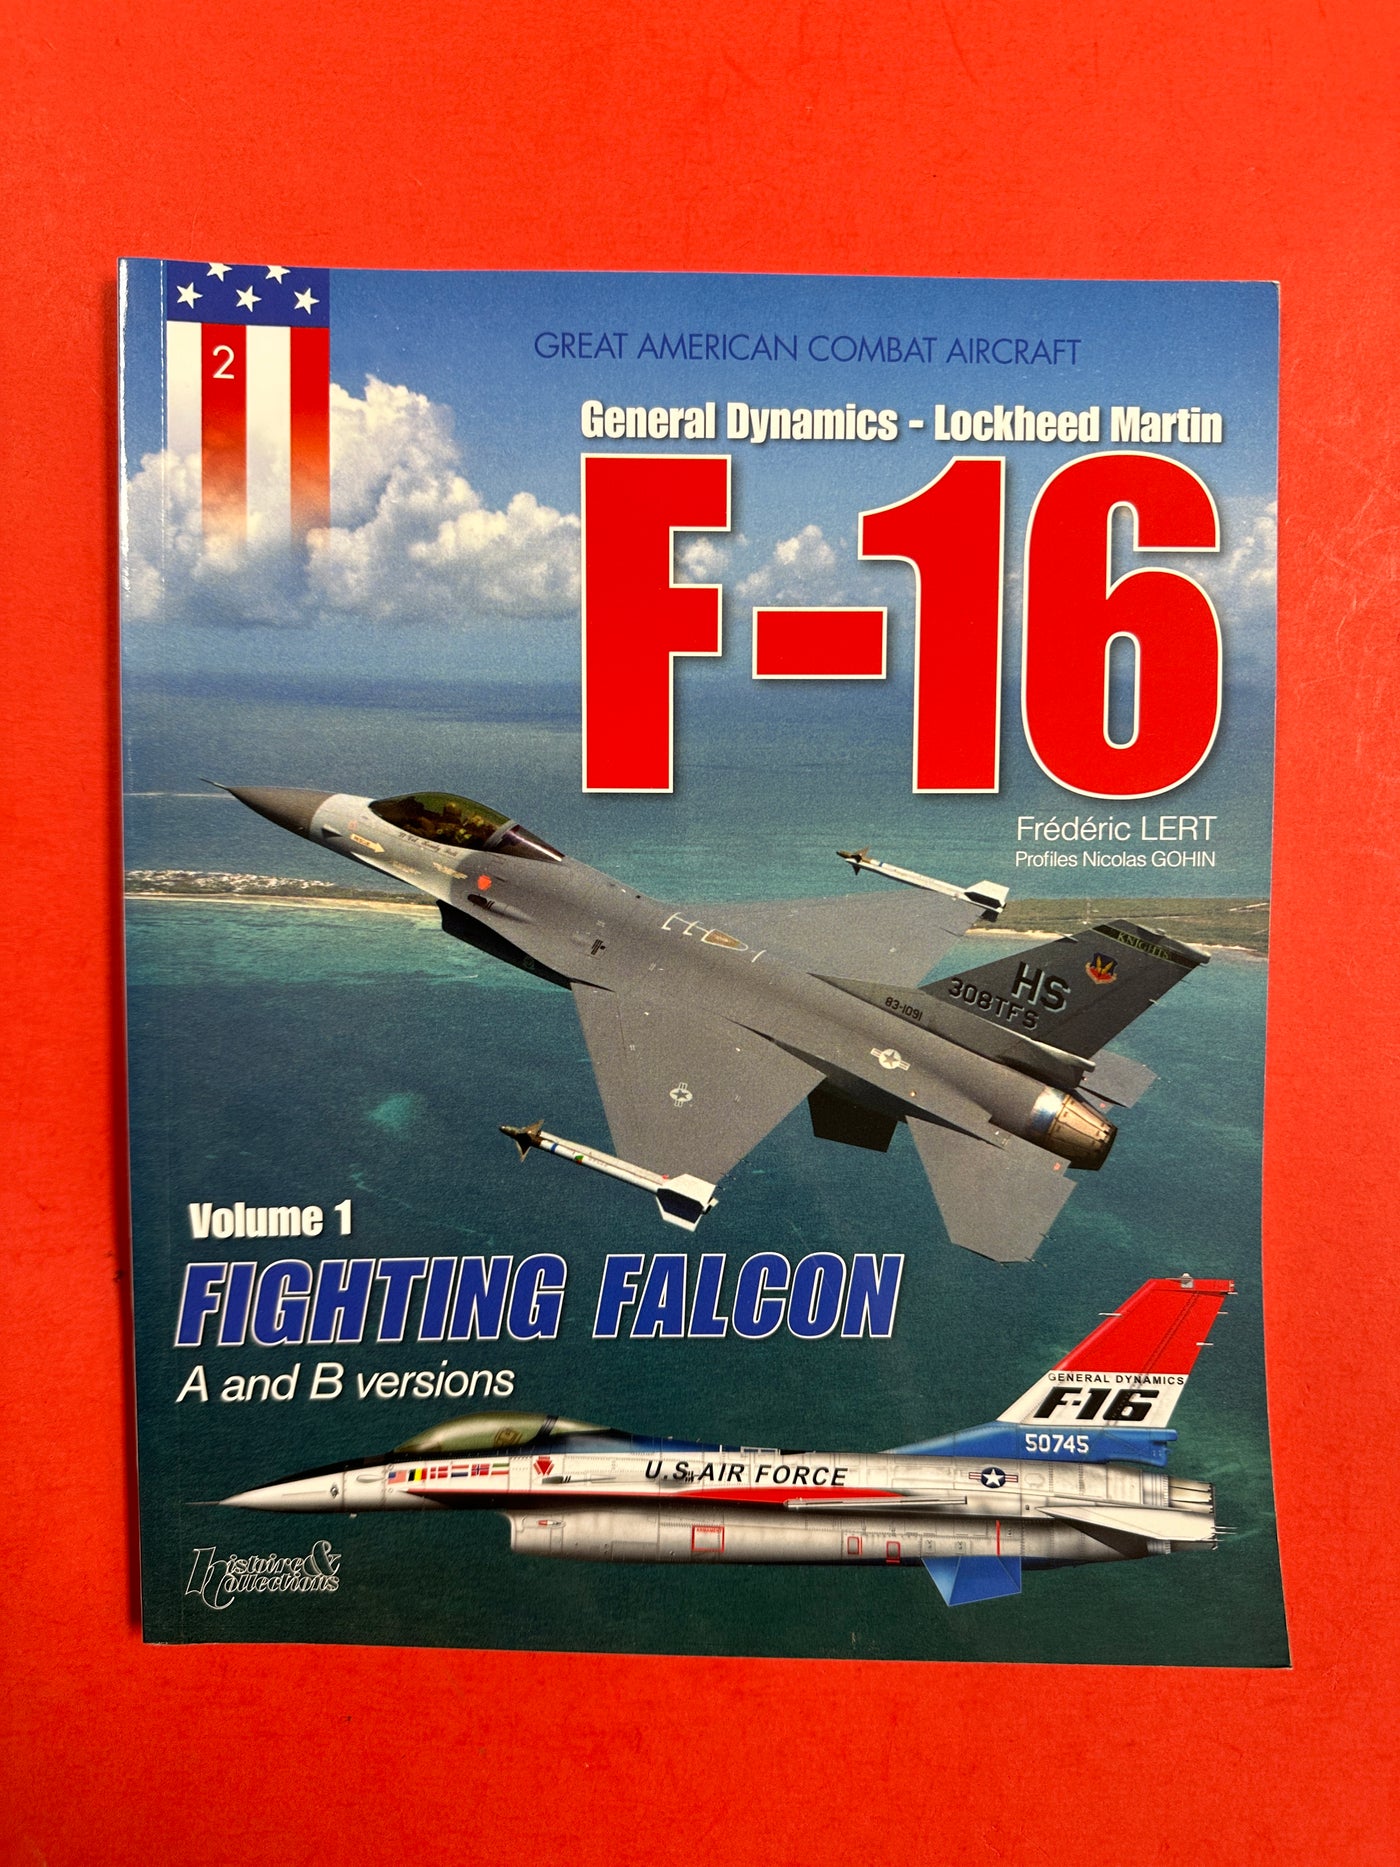 General Dynamics / Lockheed-Martin F-16 A and B Versions, Vol. 1: Fighting Falcon (Great American Combat Aircraft) Paperback – 2010